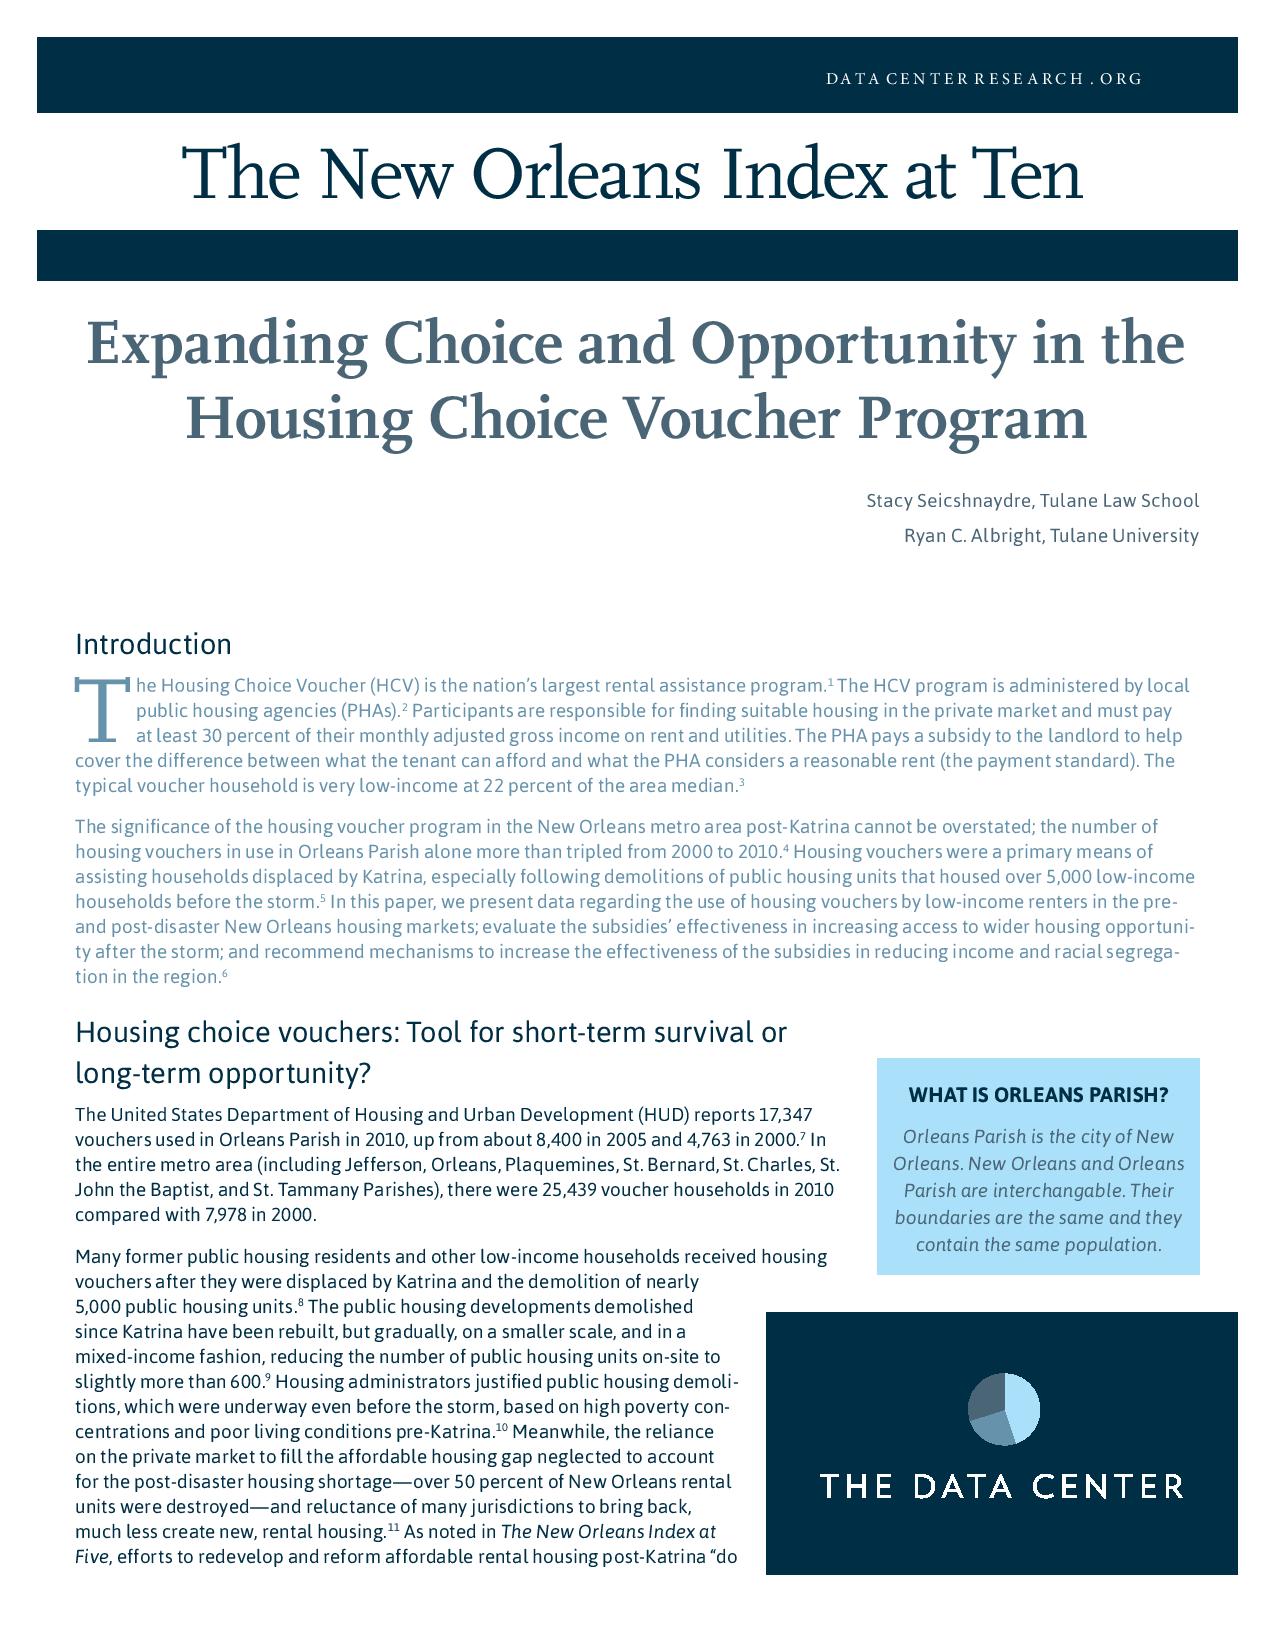 Expanding Choice and Opportunity in the Housing Choice Voucher Program